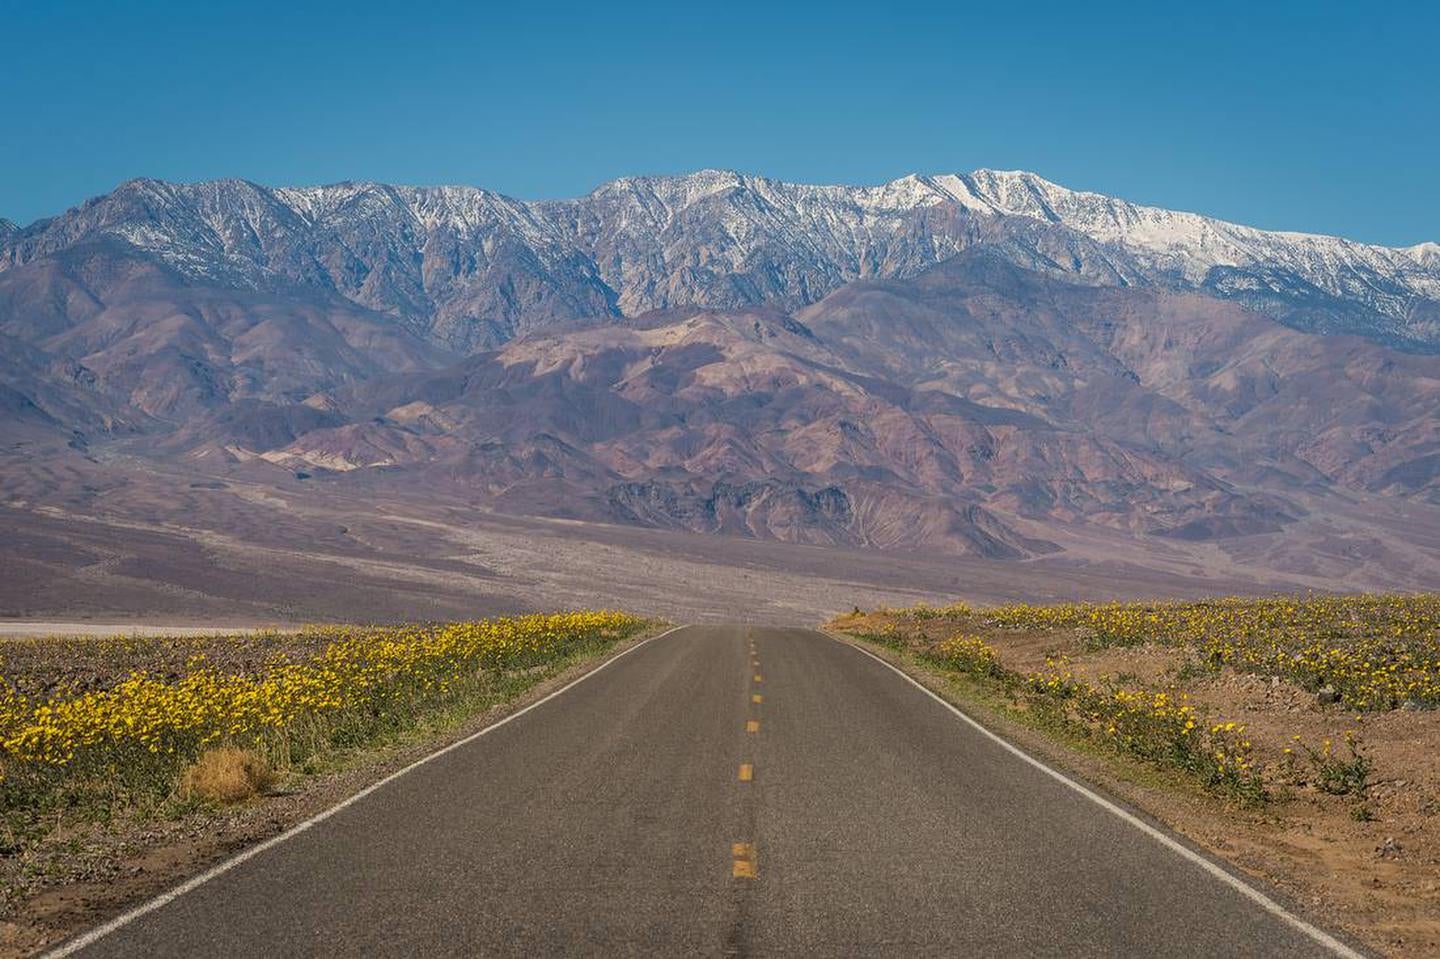 paved road lined with yellow flowers, snow-covered mountains in background



Spring in Death Valley

Credit: NPS / Kurt Moses